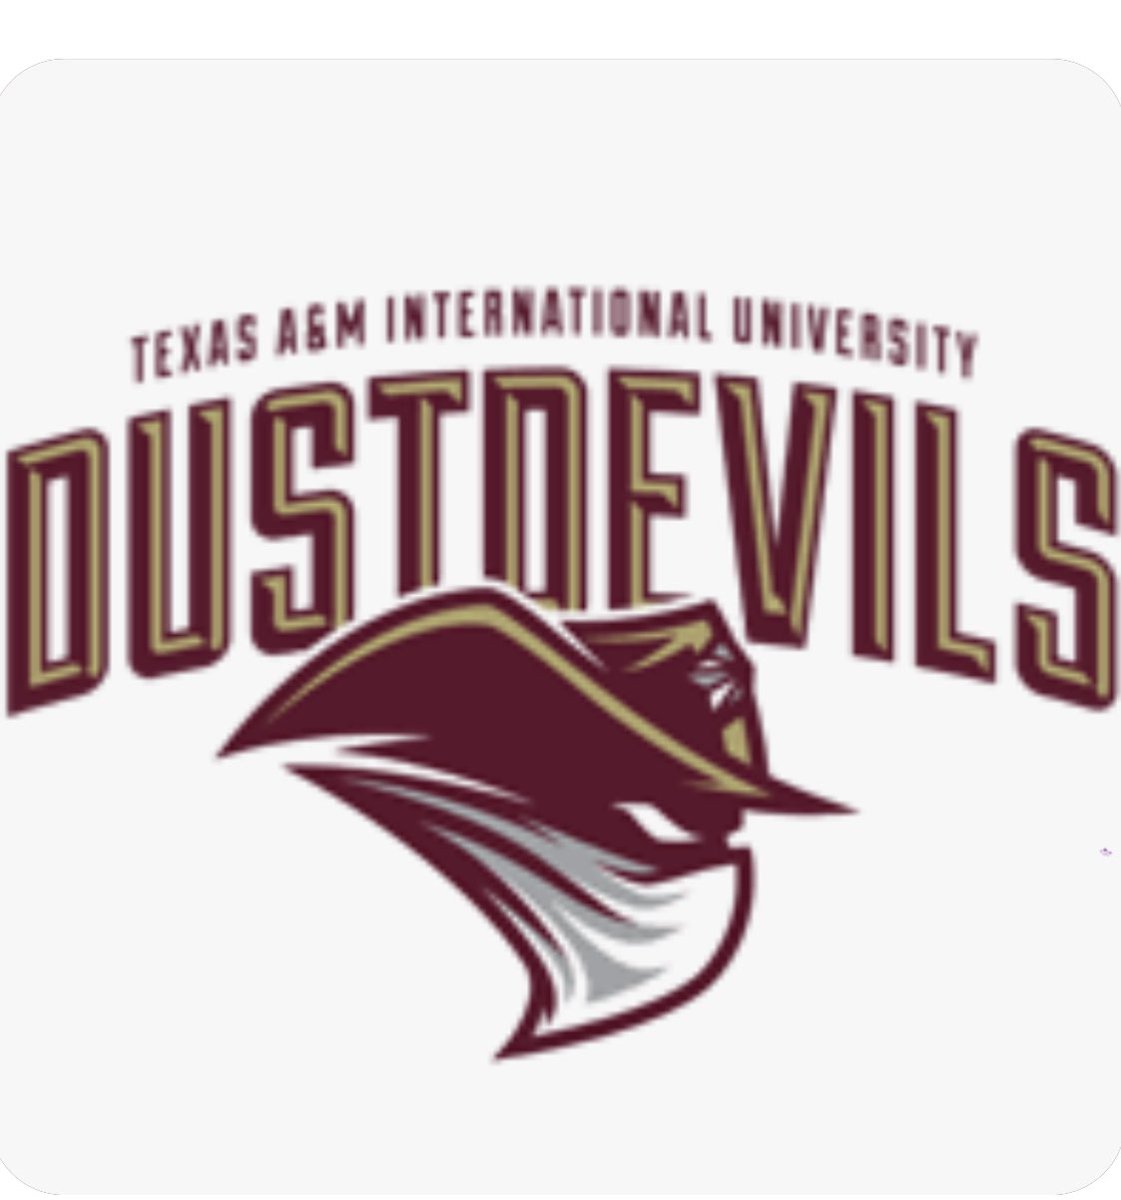 Just had a great call with @CoachNateVogel and I am so excited to review an offer from @DustdevilsWBB! @LHSGbb @coach_jgray @teamhunchobball